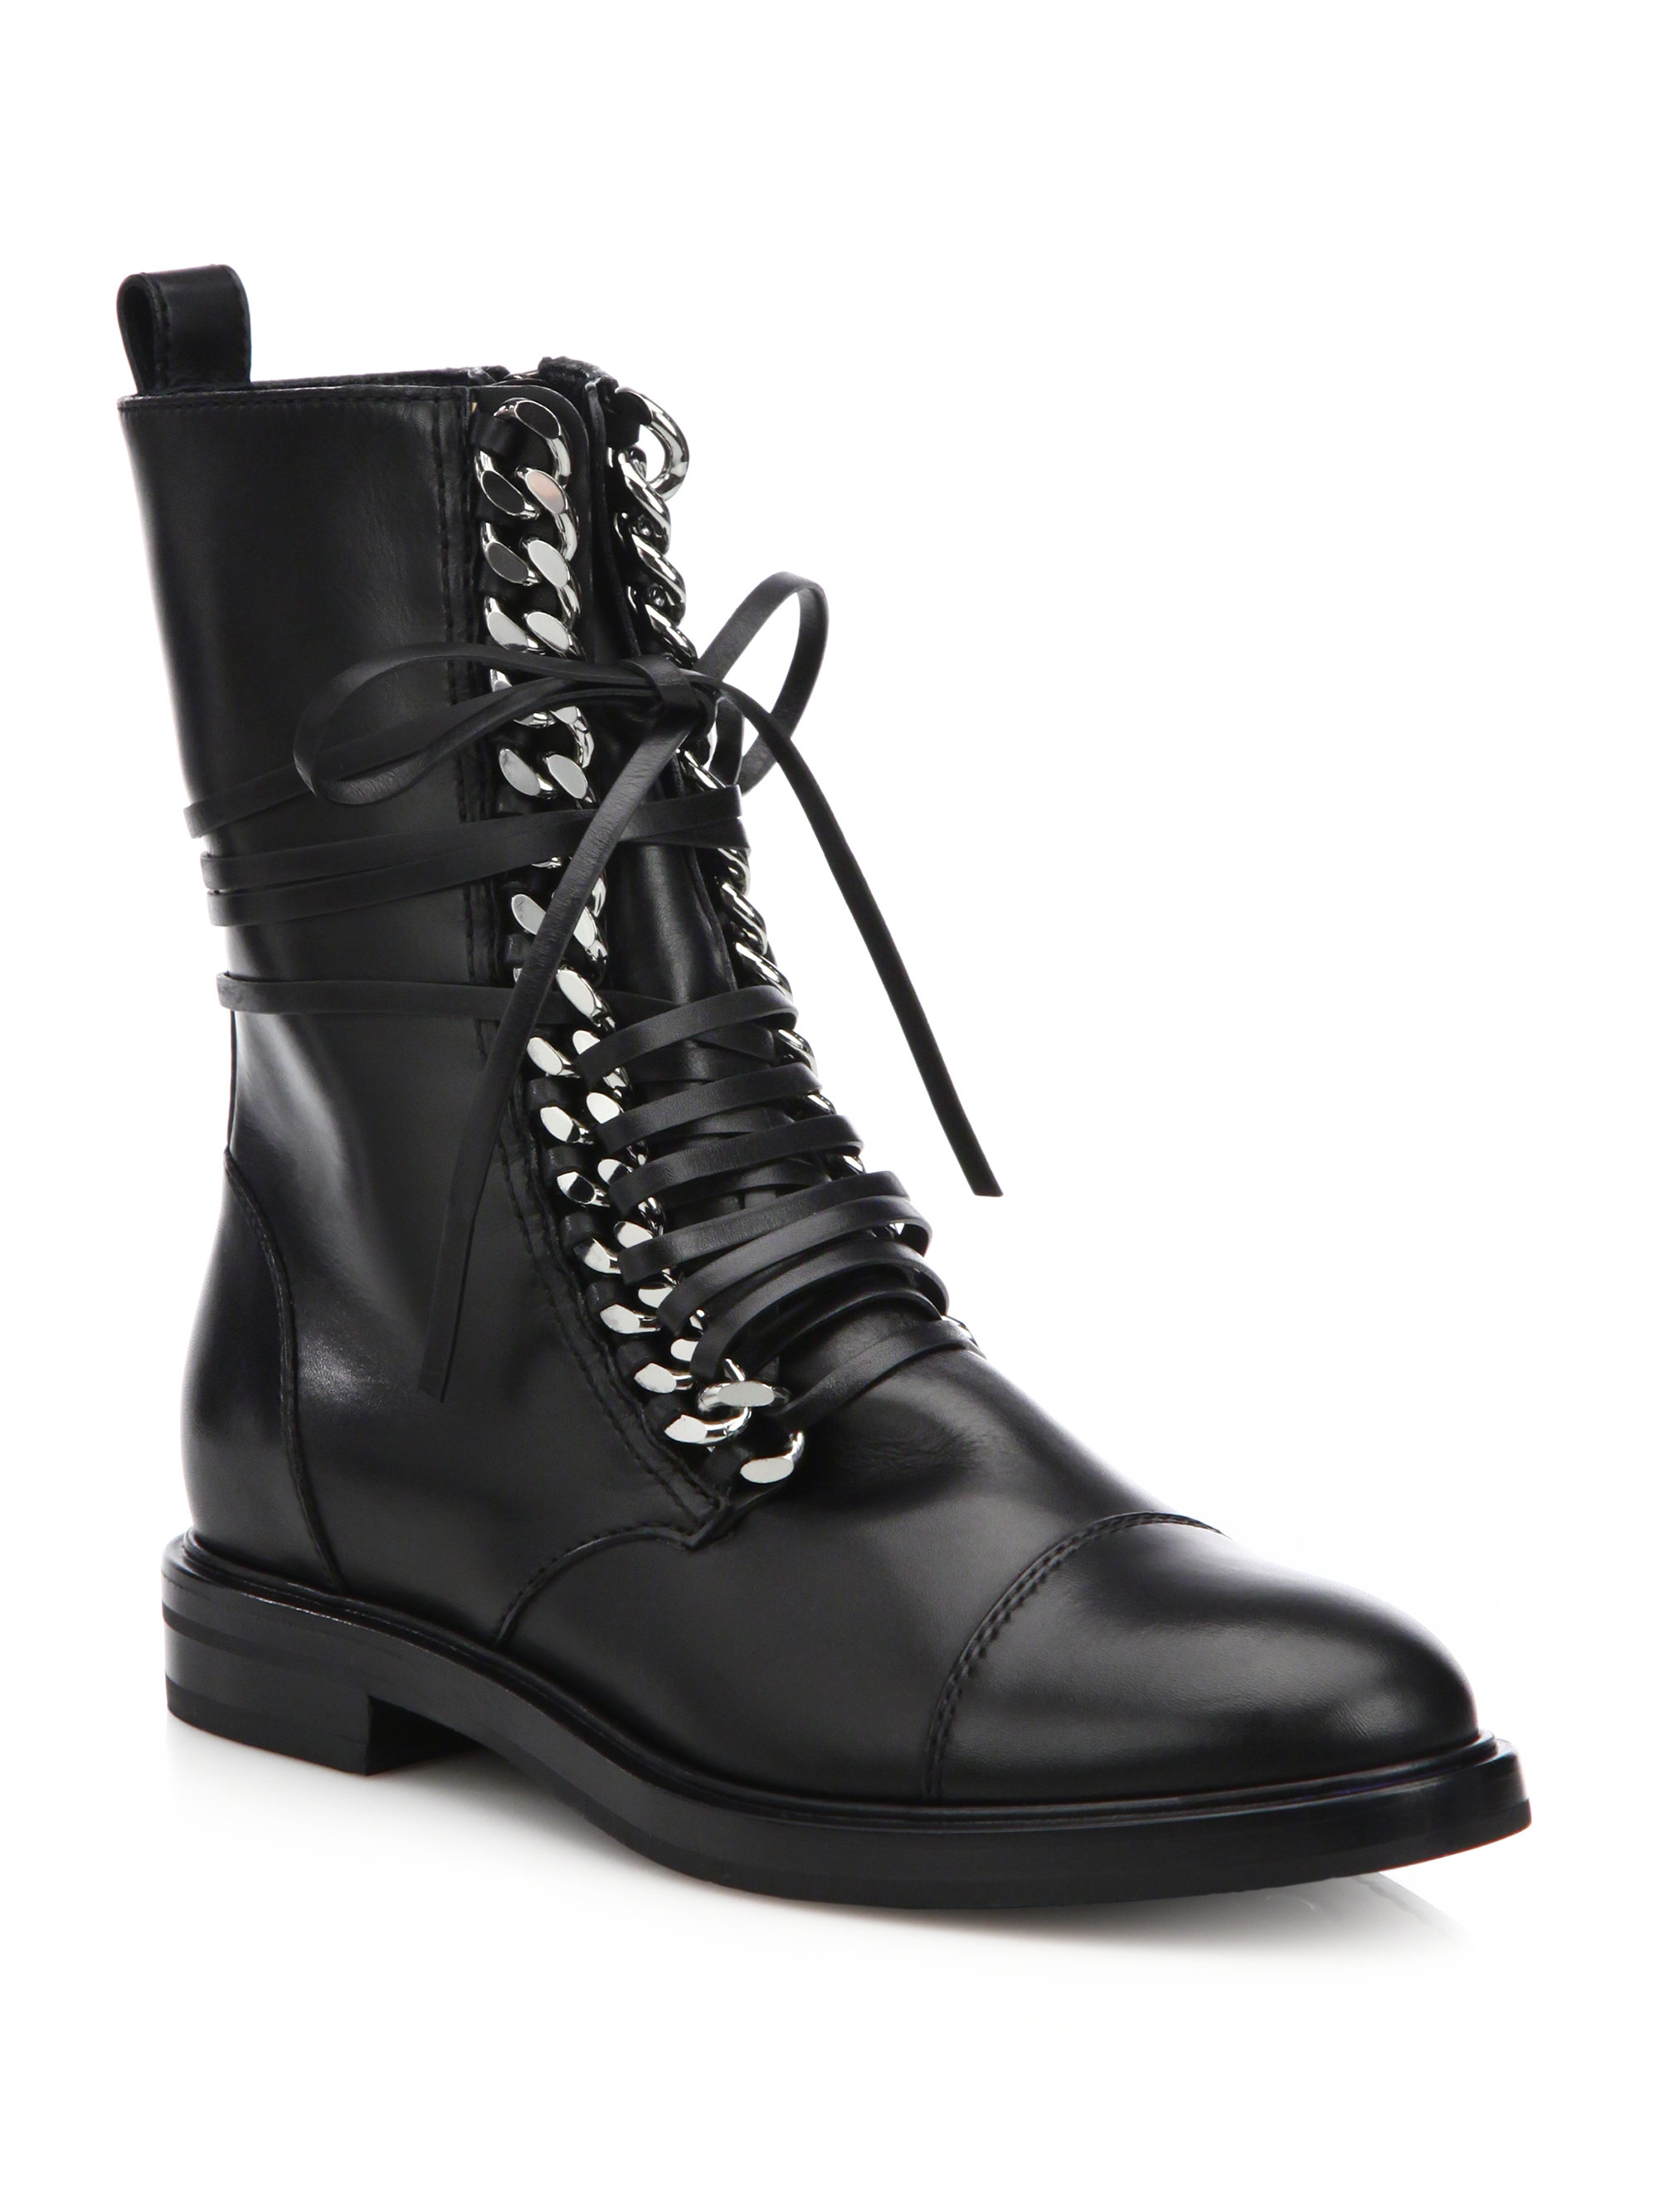 Casadei Curb Chain Lace-up Leather Combat Boots in Black - Lyst